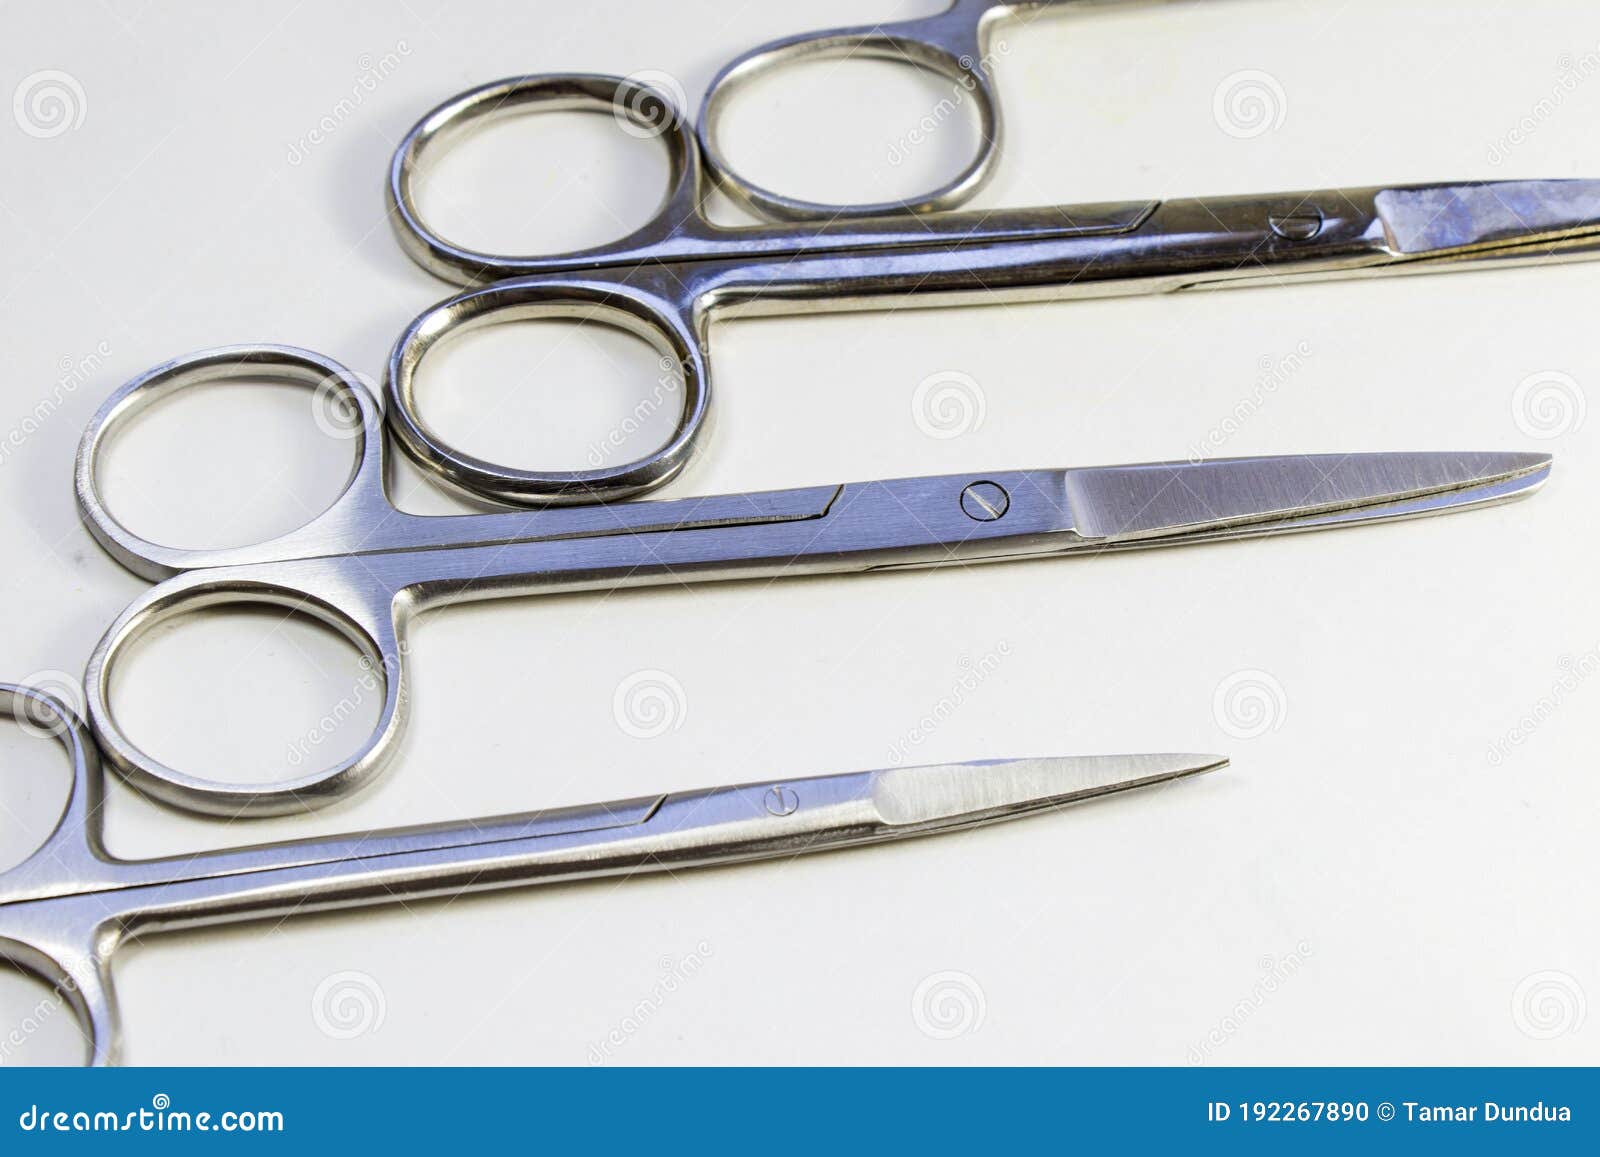 Dissection Kit - Premium Quality Stainless Steel Tools for Medical ...